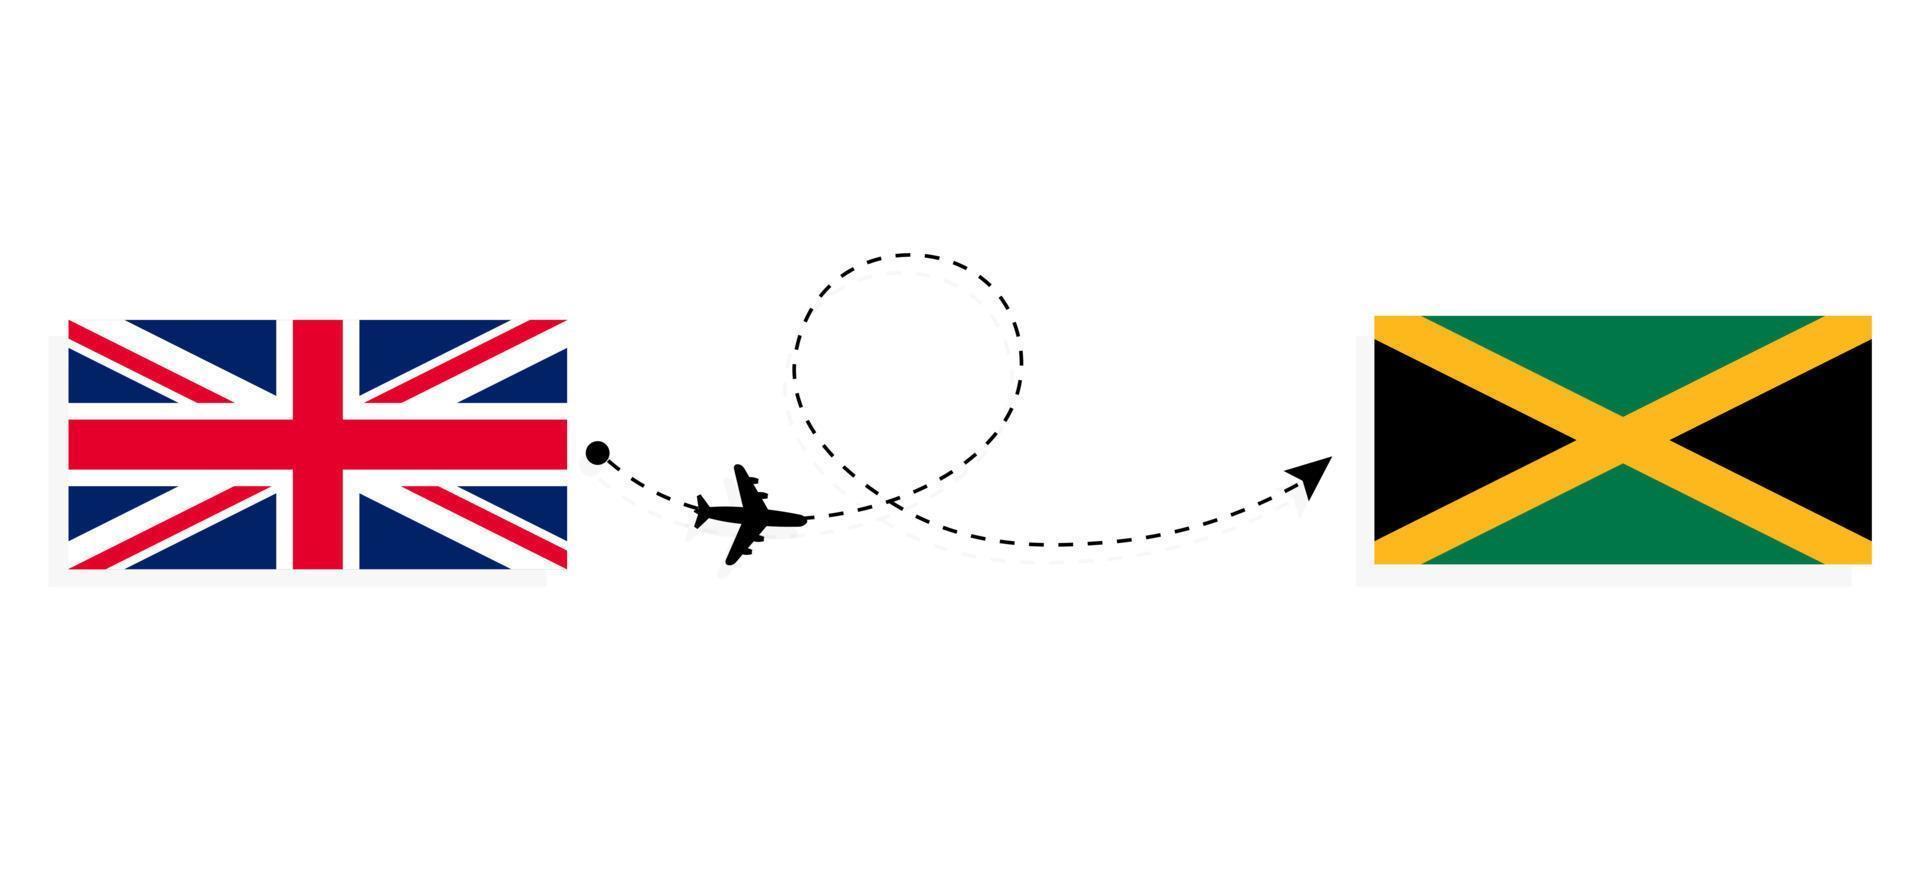 Flight and travel from United Kingdom of Great Britain to Jamaica by passenger airplane Travel concept vector